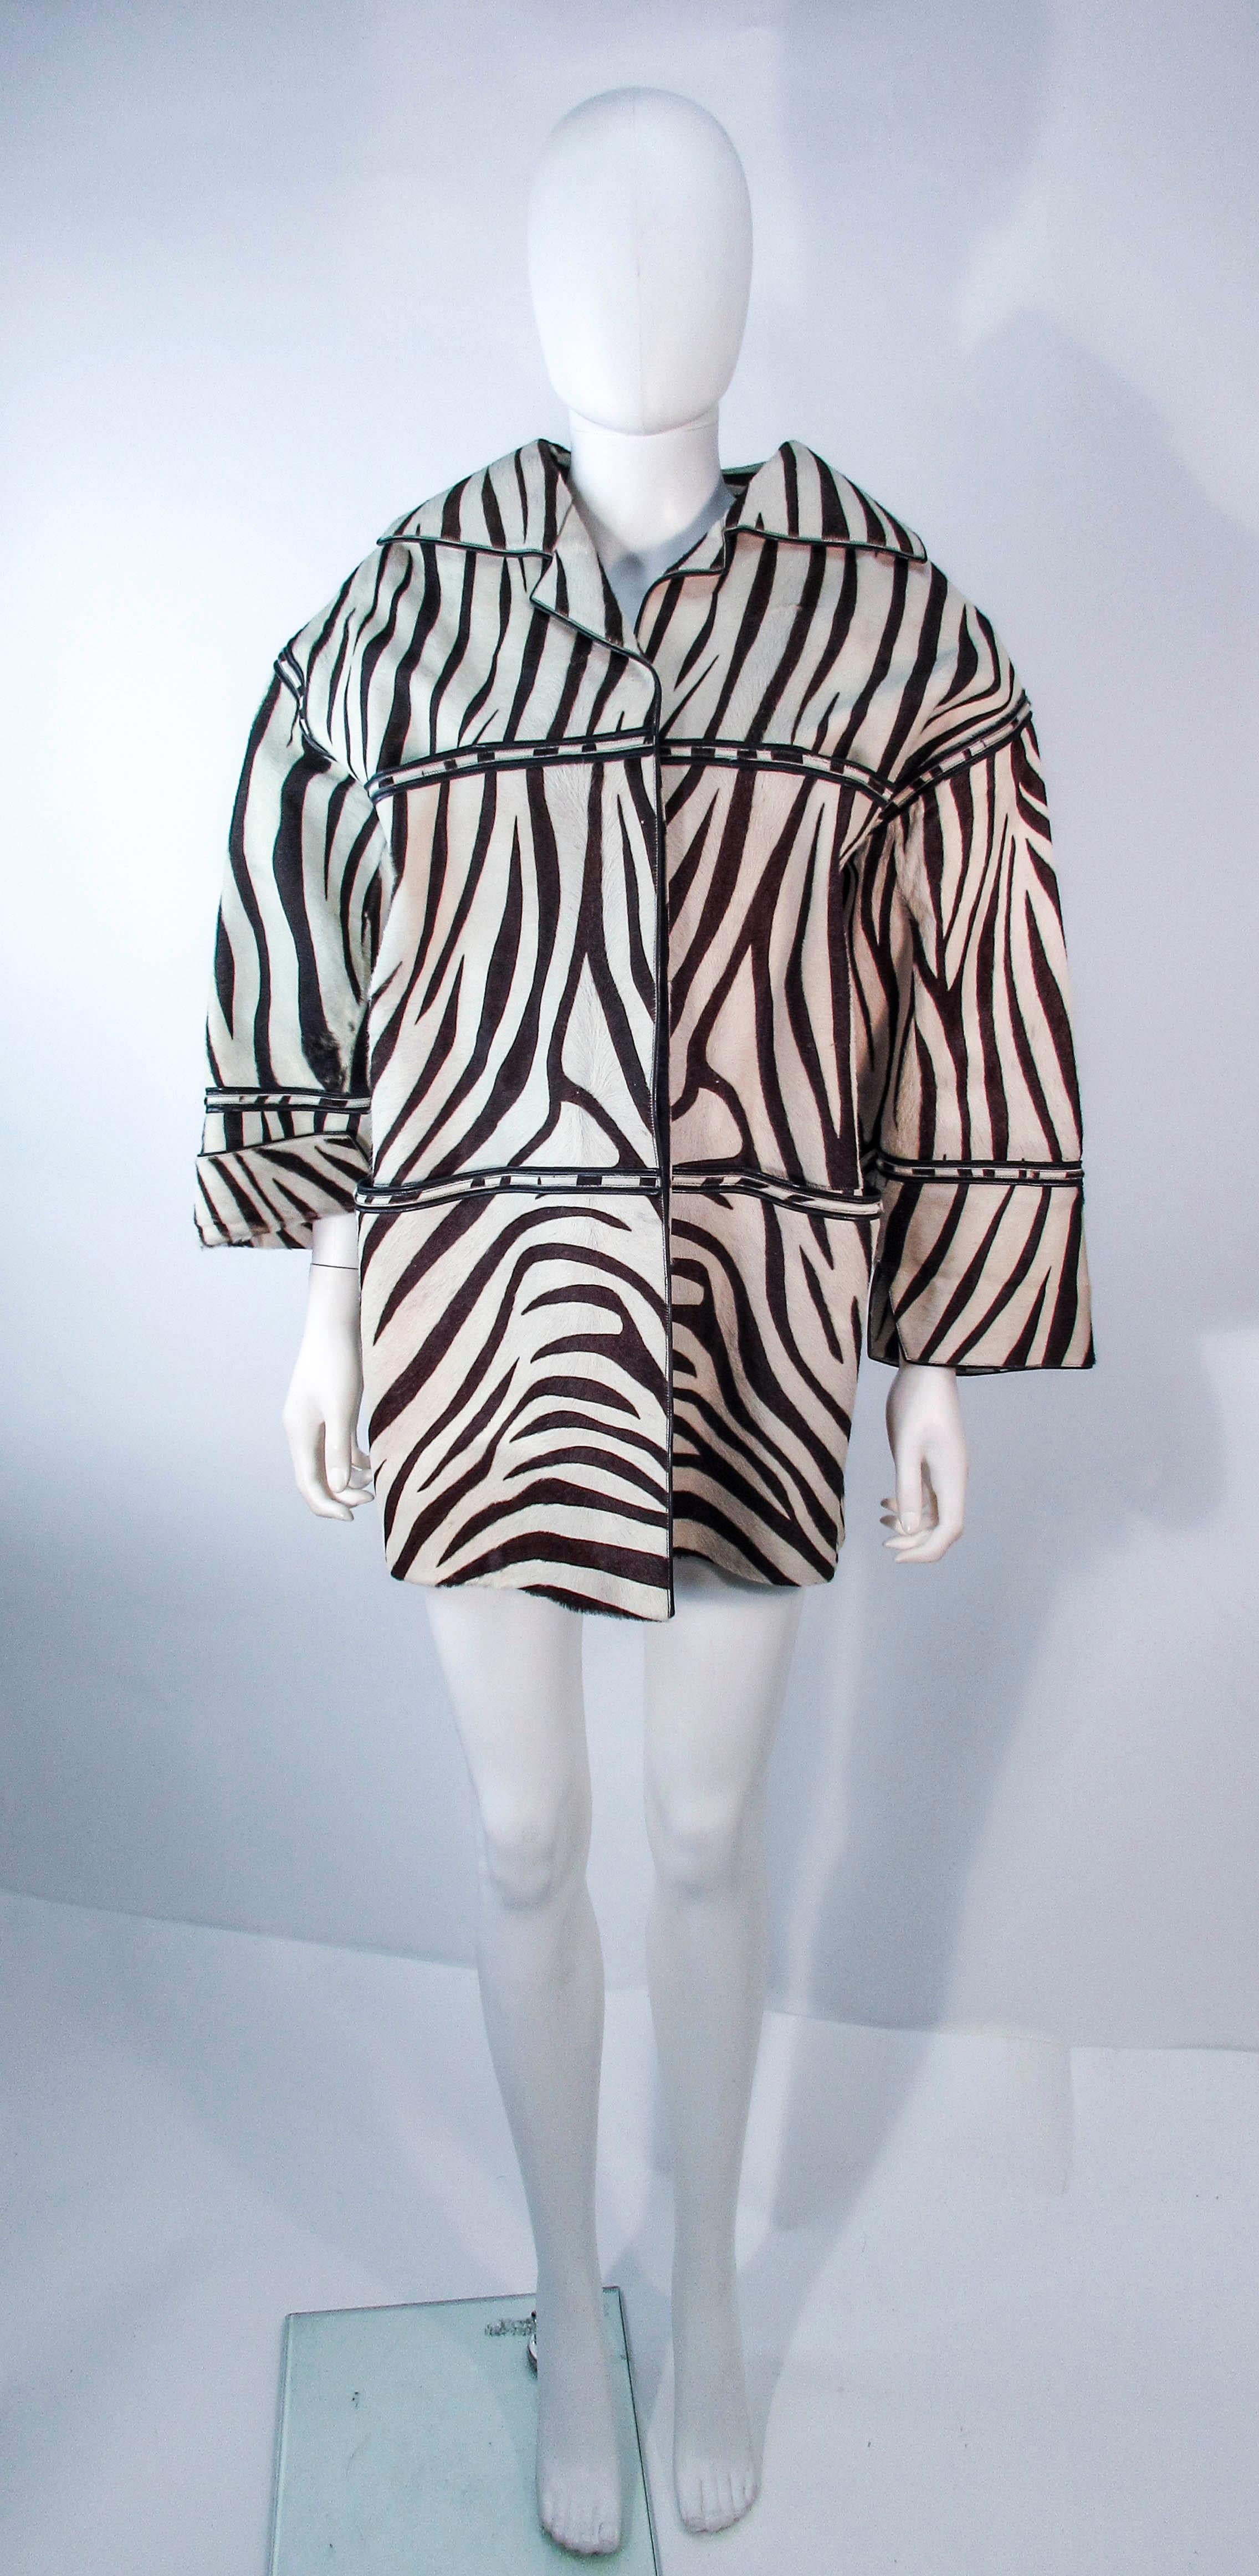 This wonderful coat is an Amen Wardy design. It is composed of a zebra pattern cowhide. Features four front pockets and center front button closures. In excellent vintage condition, some signs of wear due to age. Please feel free to ask us any